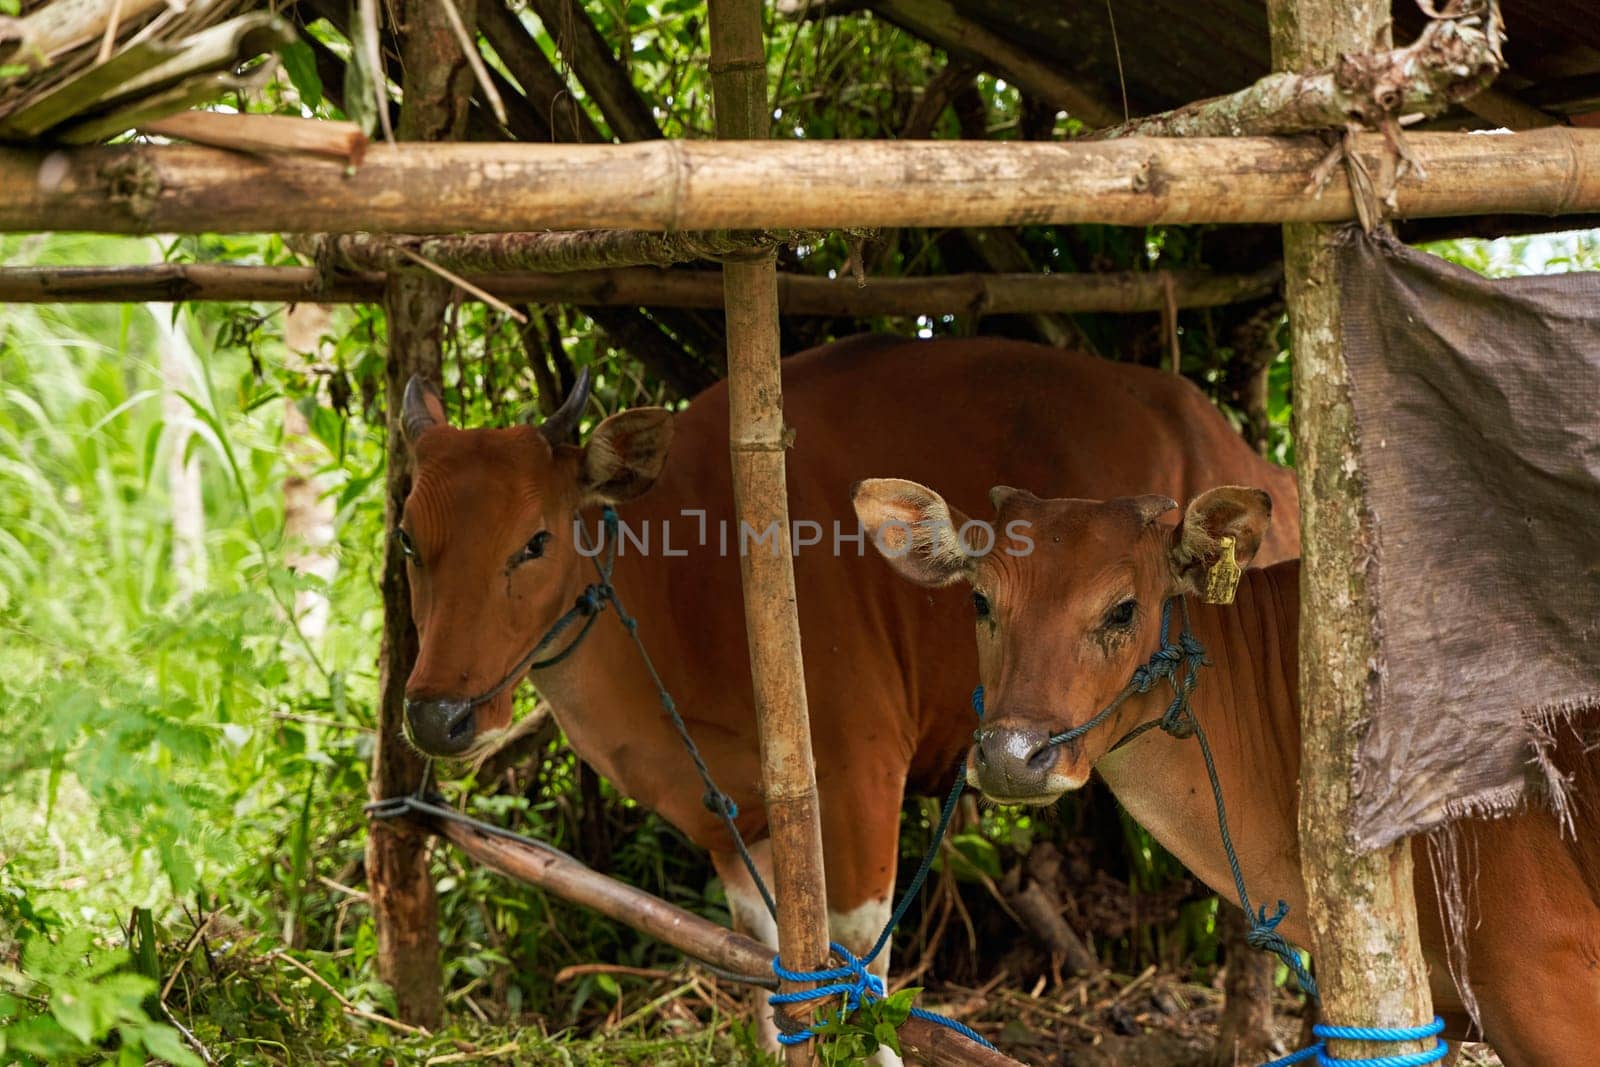 Balinese brown cows stand tied up in a stall under a canopy in the mountains